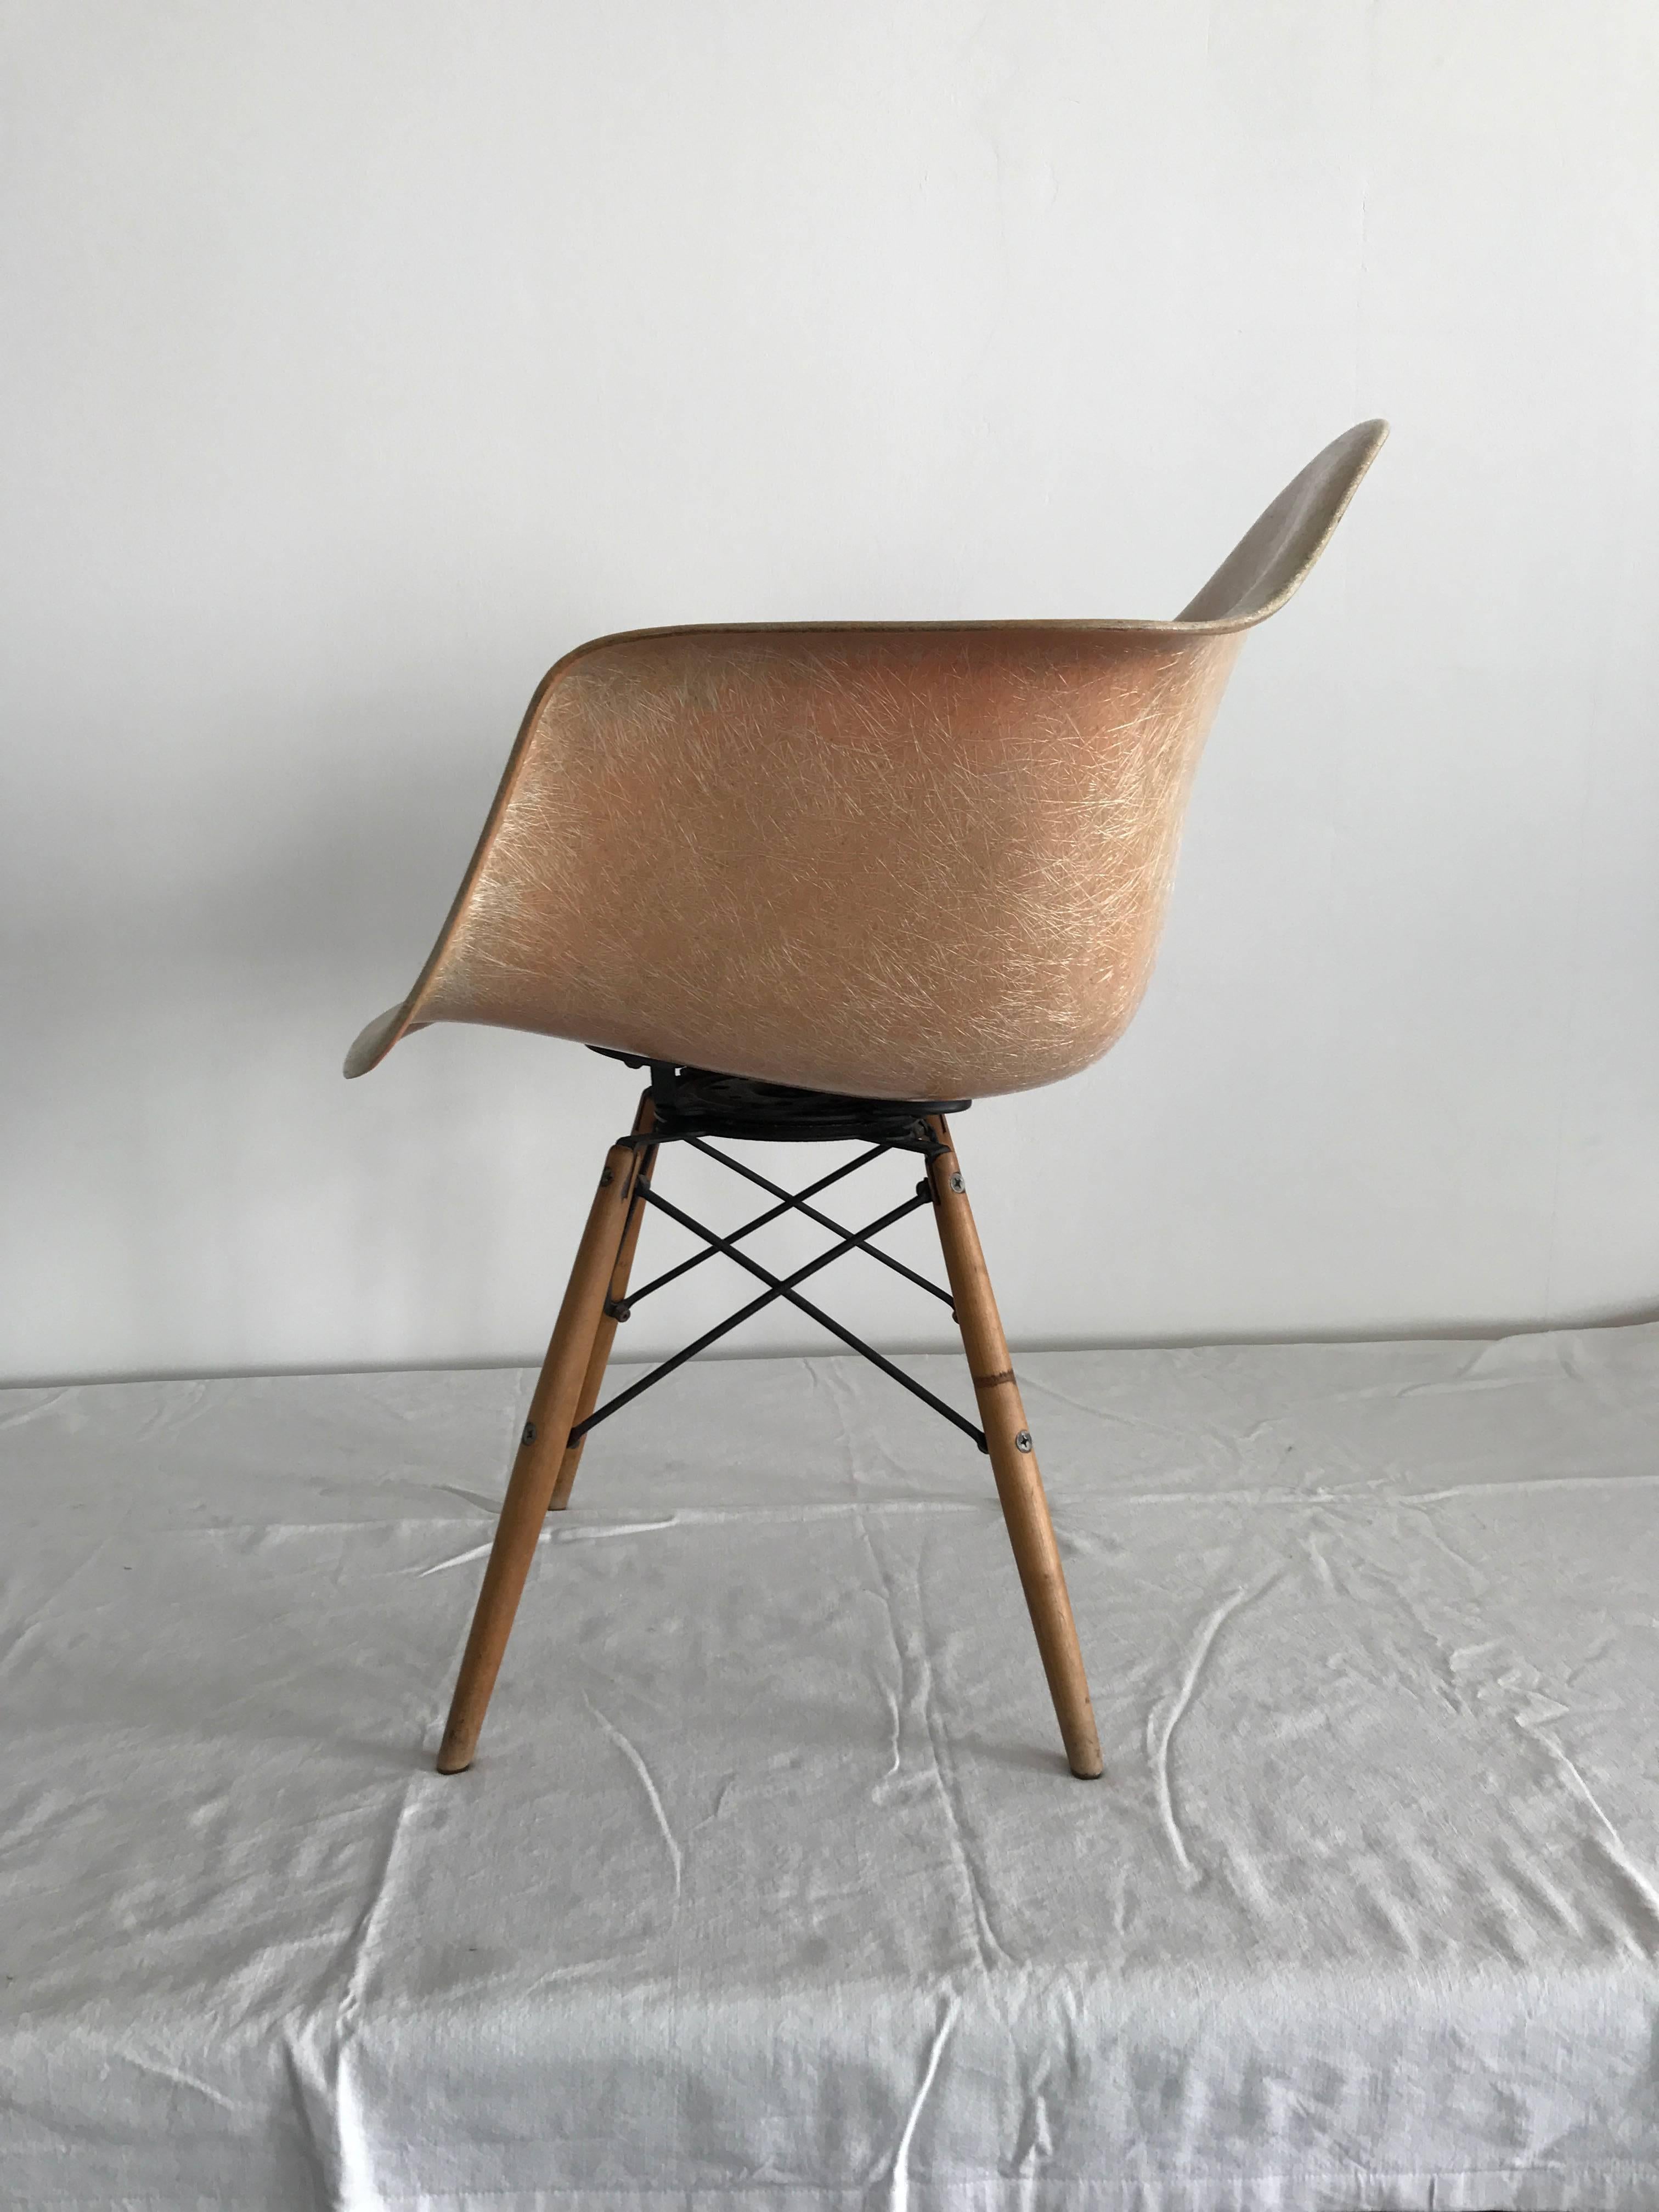 First production / first generation 1949-1950 Zenith Herman Miller / Charles Eames PAW Rope Swivel chair in color salmon (faded) / dowel legs in birch / all original parts / the awesome dowel base reads Seng Chicago on the metal portion/ fibre glass